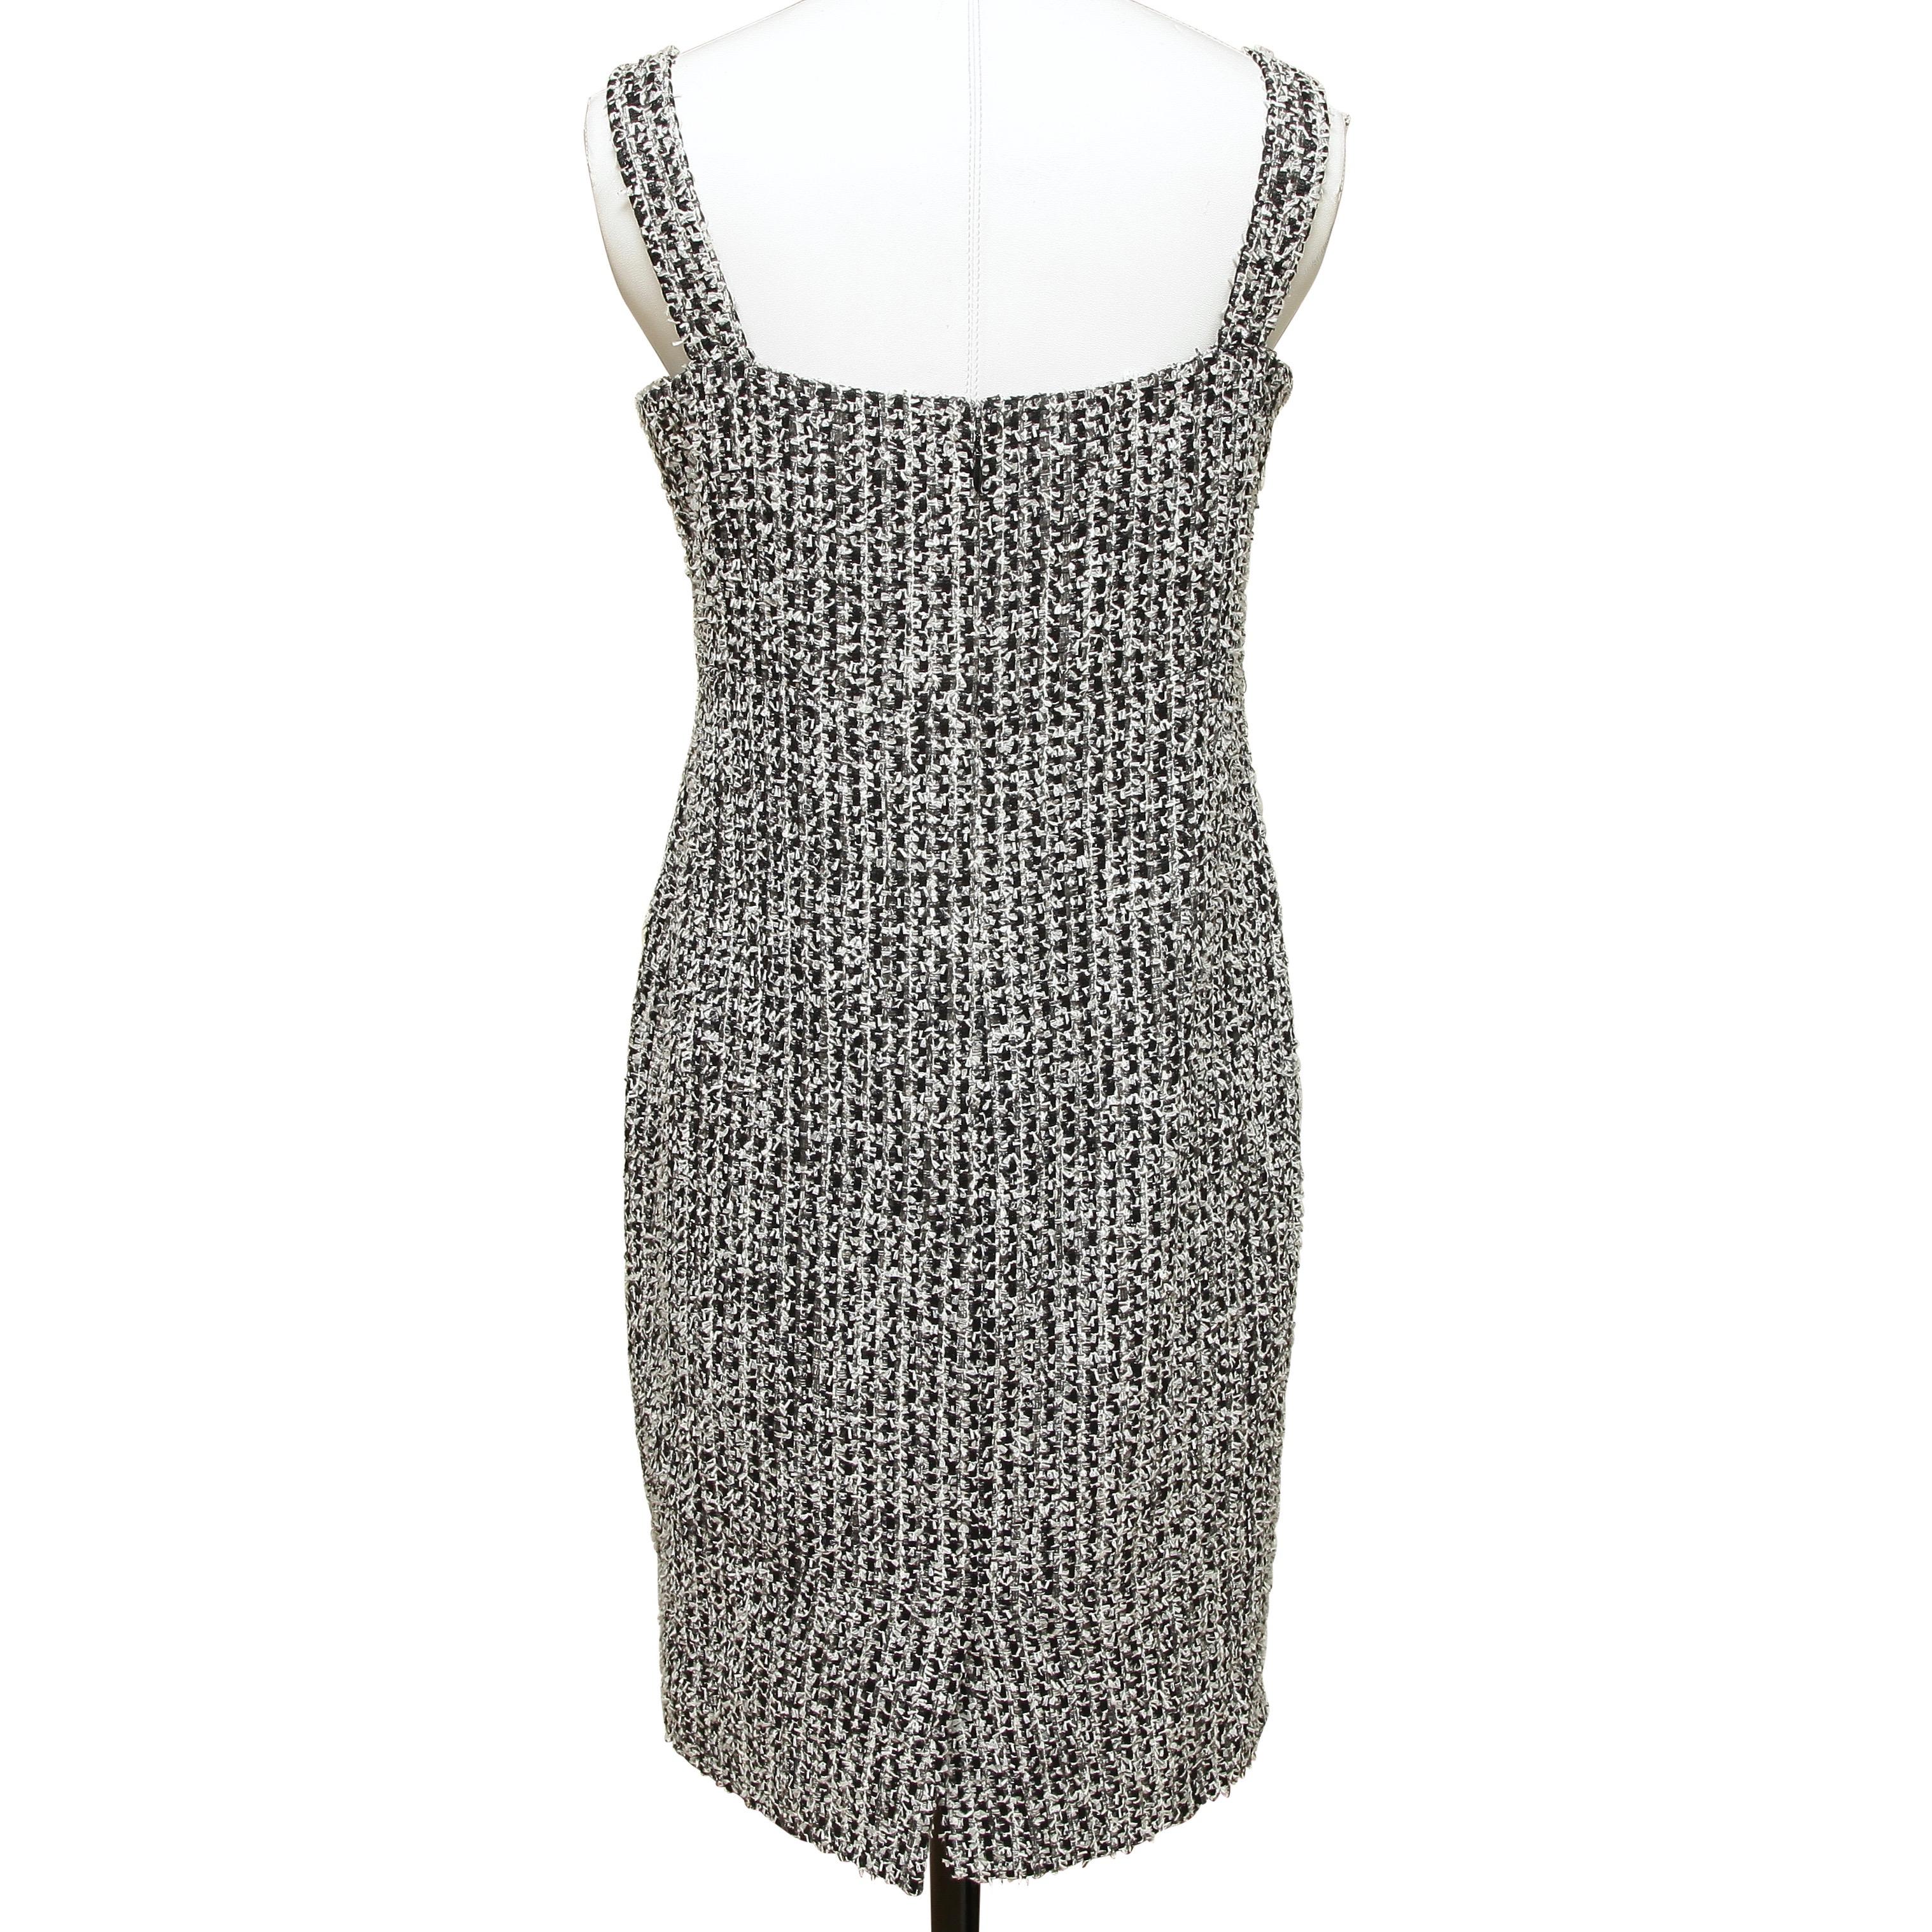 CHANEL Dress Sleeveless Tweed  Black White Fantasy Shift Square Neck Sz 40 2014 In Fair Condition For Sale In Hollywood, FL